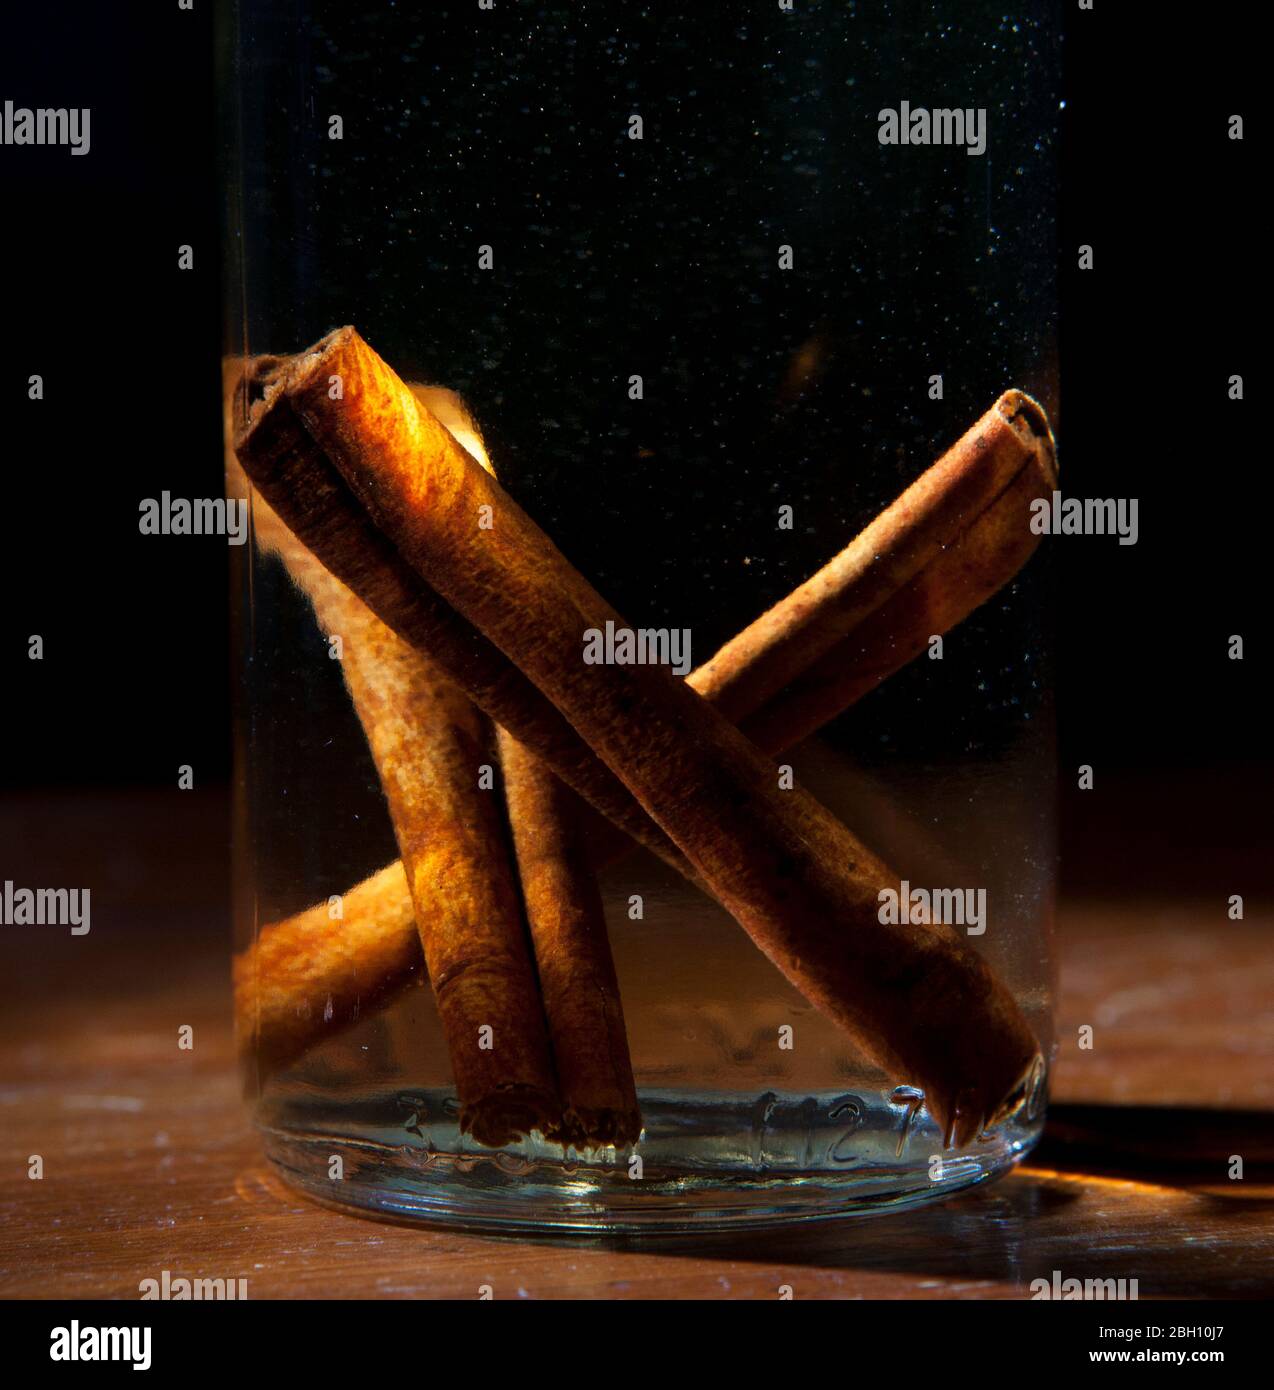 Cinnamon sticks sit in a glass bottle of vodka to make homemade infused flavored vodka Stock Photo